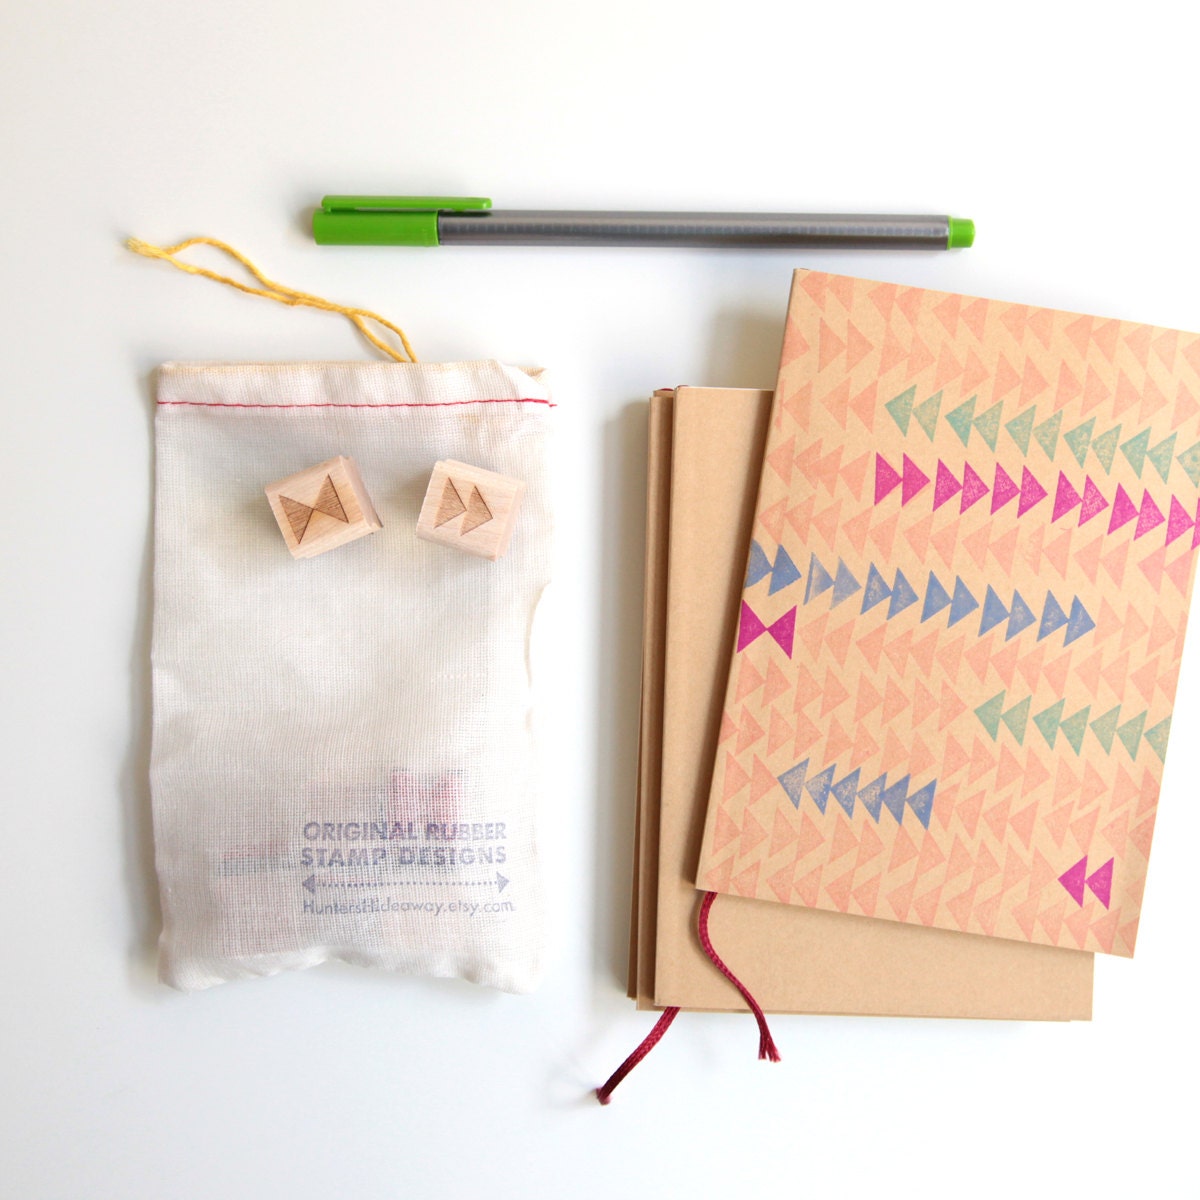 DIY Notebook Kit with geometric rubber stamps and blank sketchbook